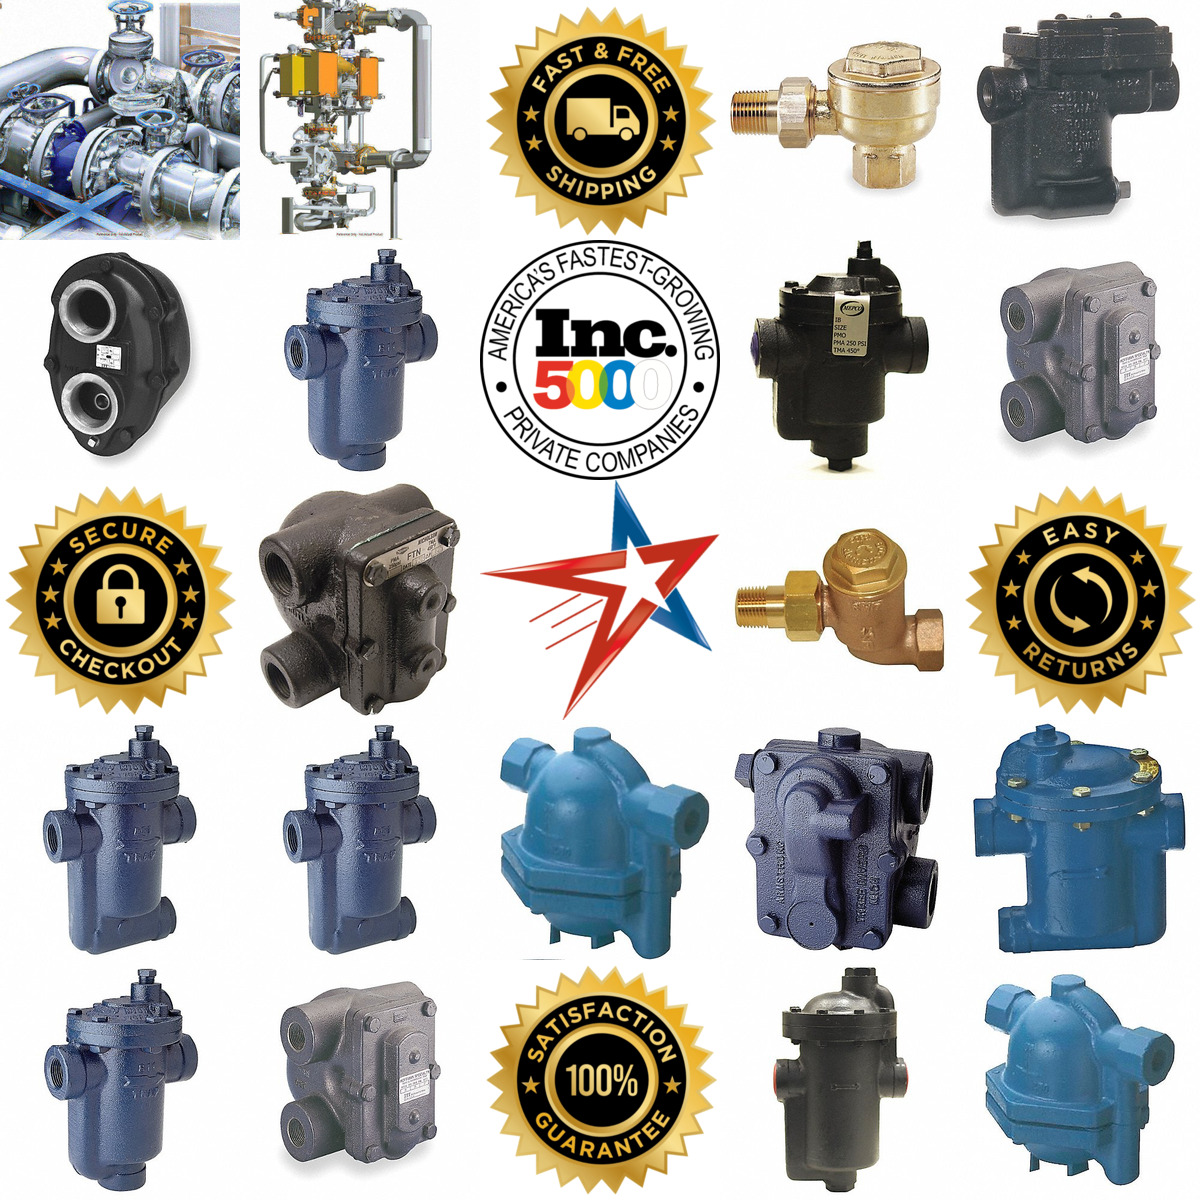 A selection of Steam Traps products on GoVets